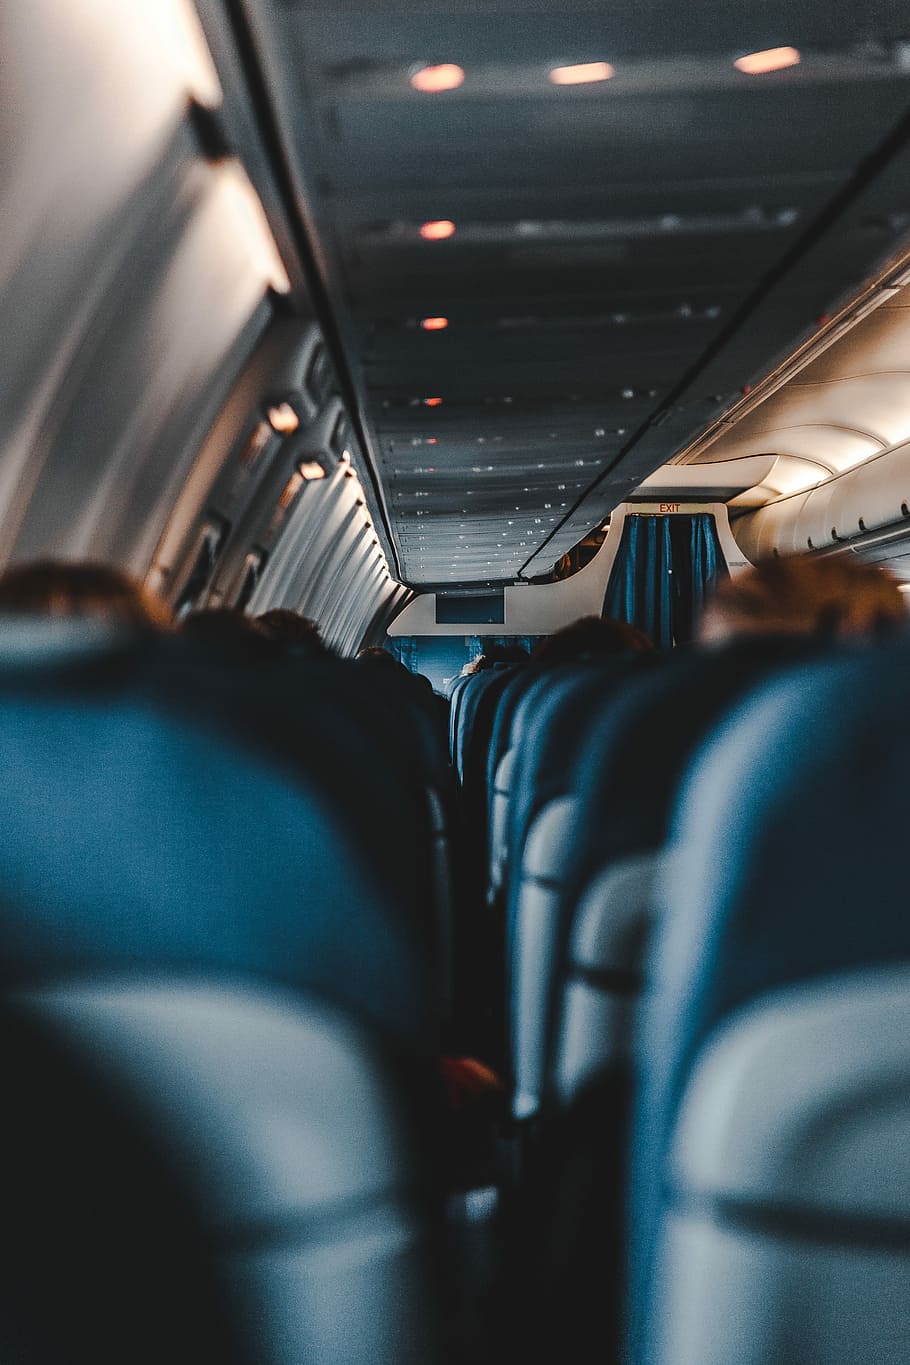 selective focus photography of airplane, people sitting inside plane